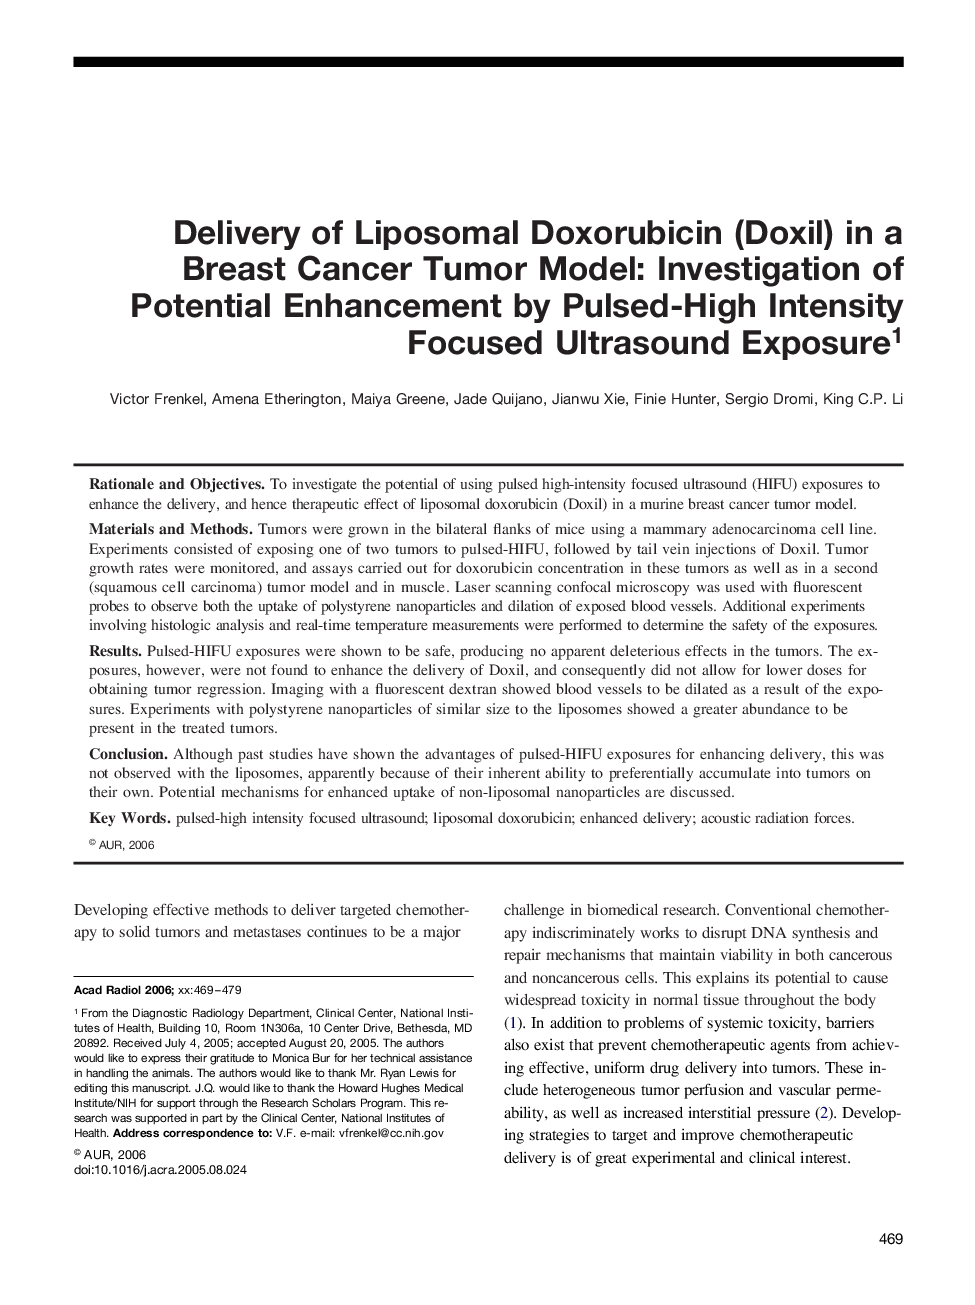 Delivery of Liposomal Doxorubicin (Doxil) in a Breast Cancer Tumor Model: Investigation of Potential Enhancement by Pulsed-High Intensity Focused Ultrasound Exposure